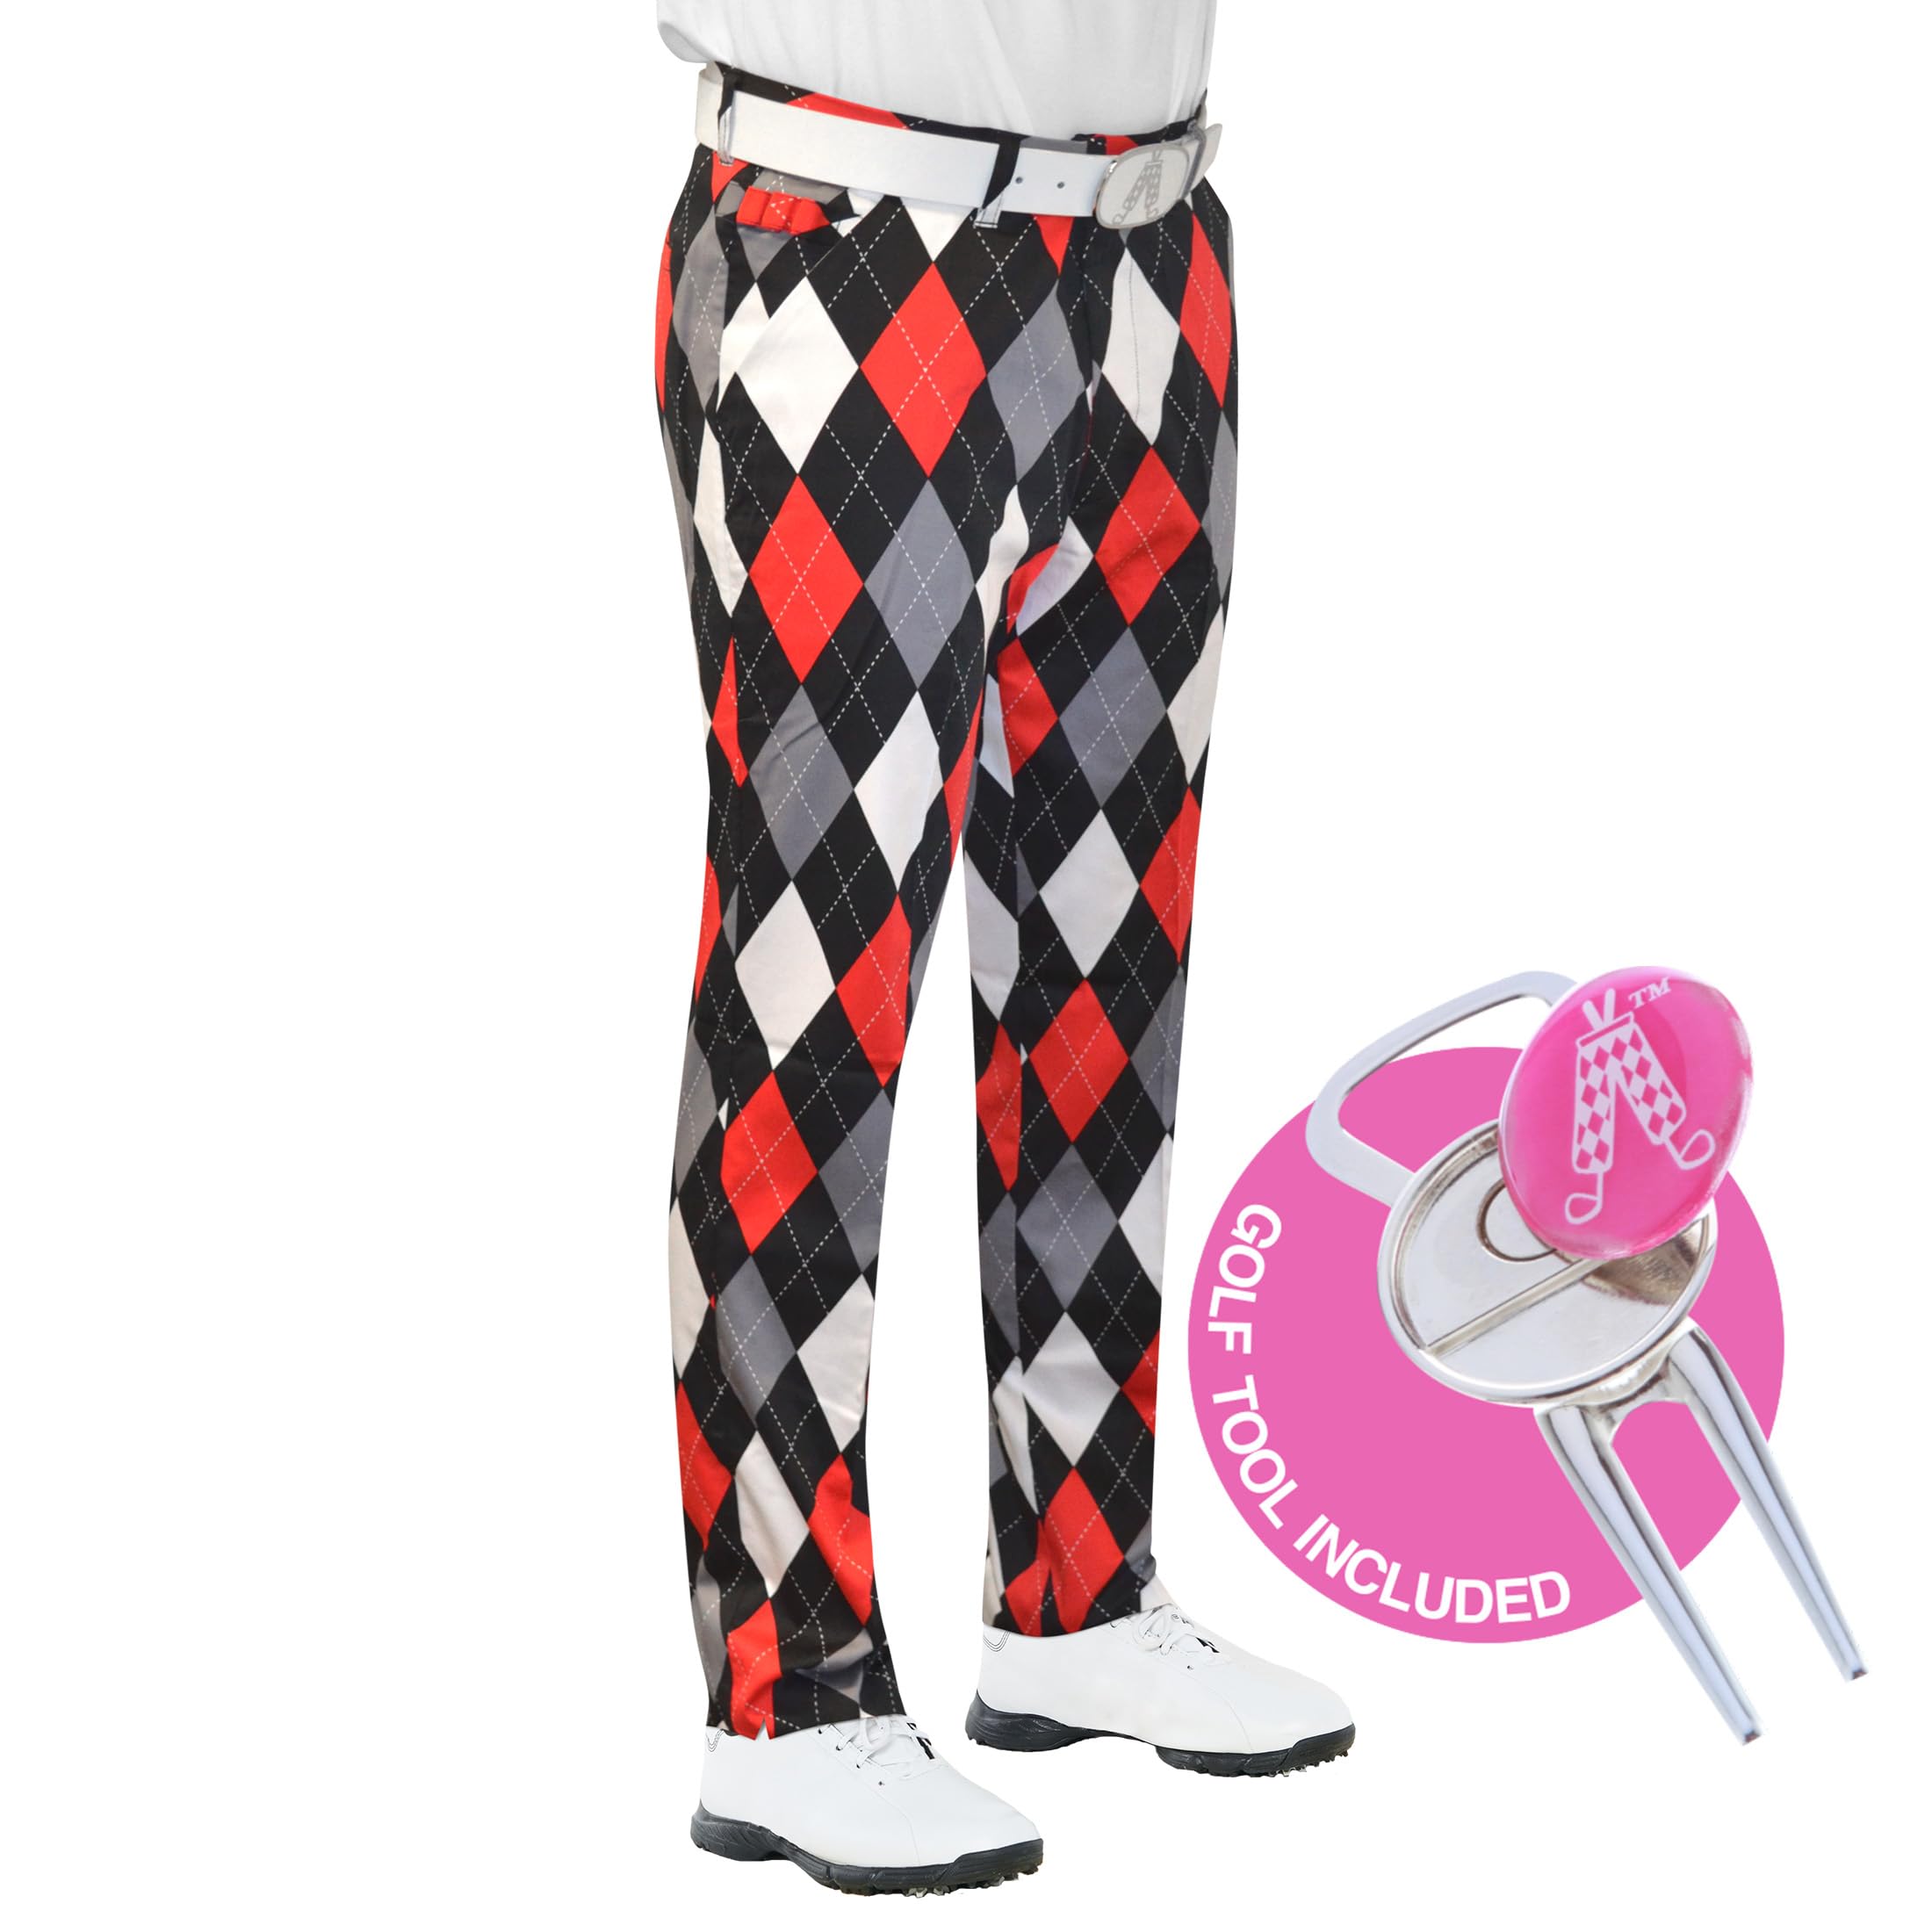 ROYAL & AWESOME HERREN-GOLFHOSE, Mehrfarbig (Diamonds in the Rough), W44/L34